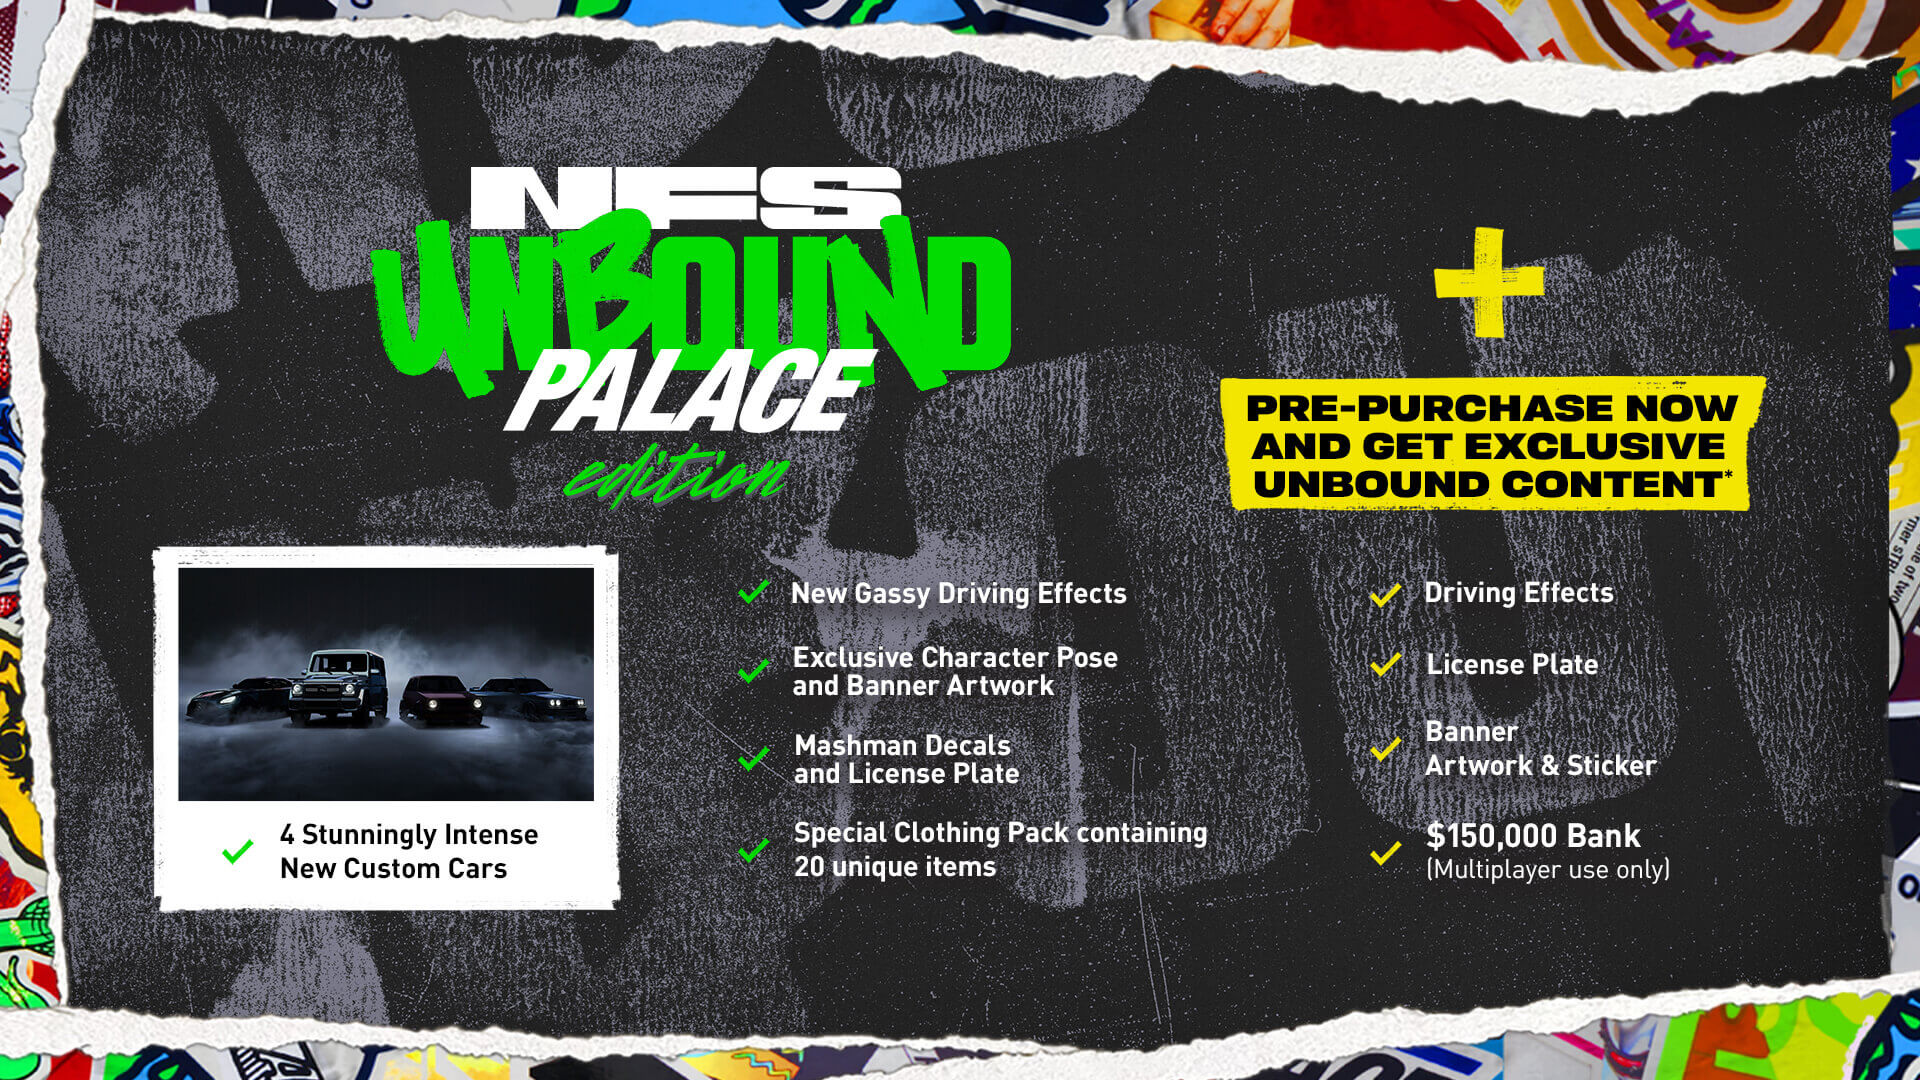 NFS - Need for Speed Unbound Palace Edition